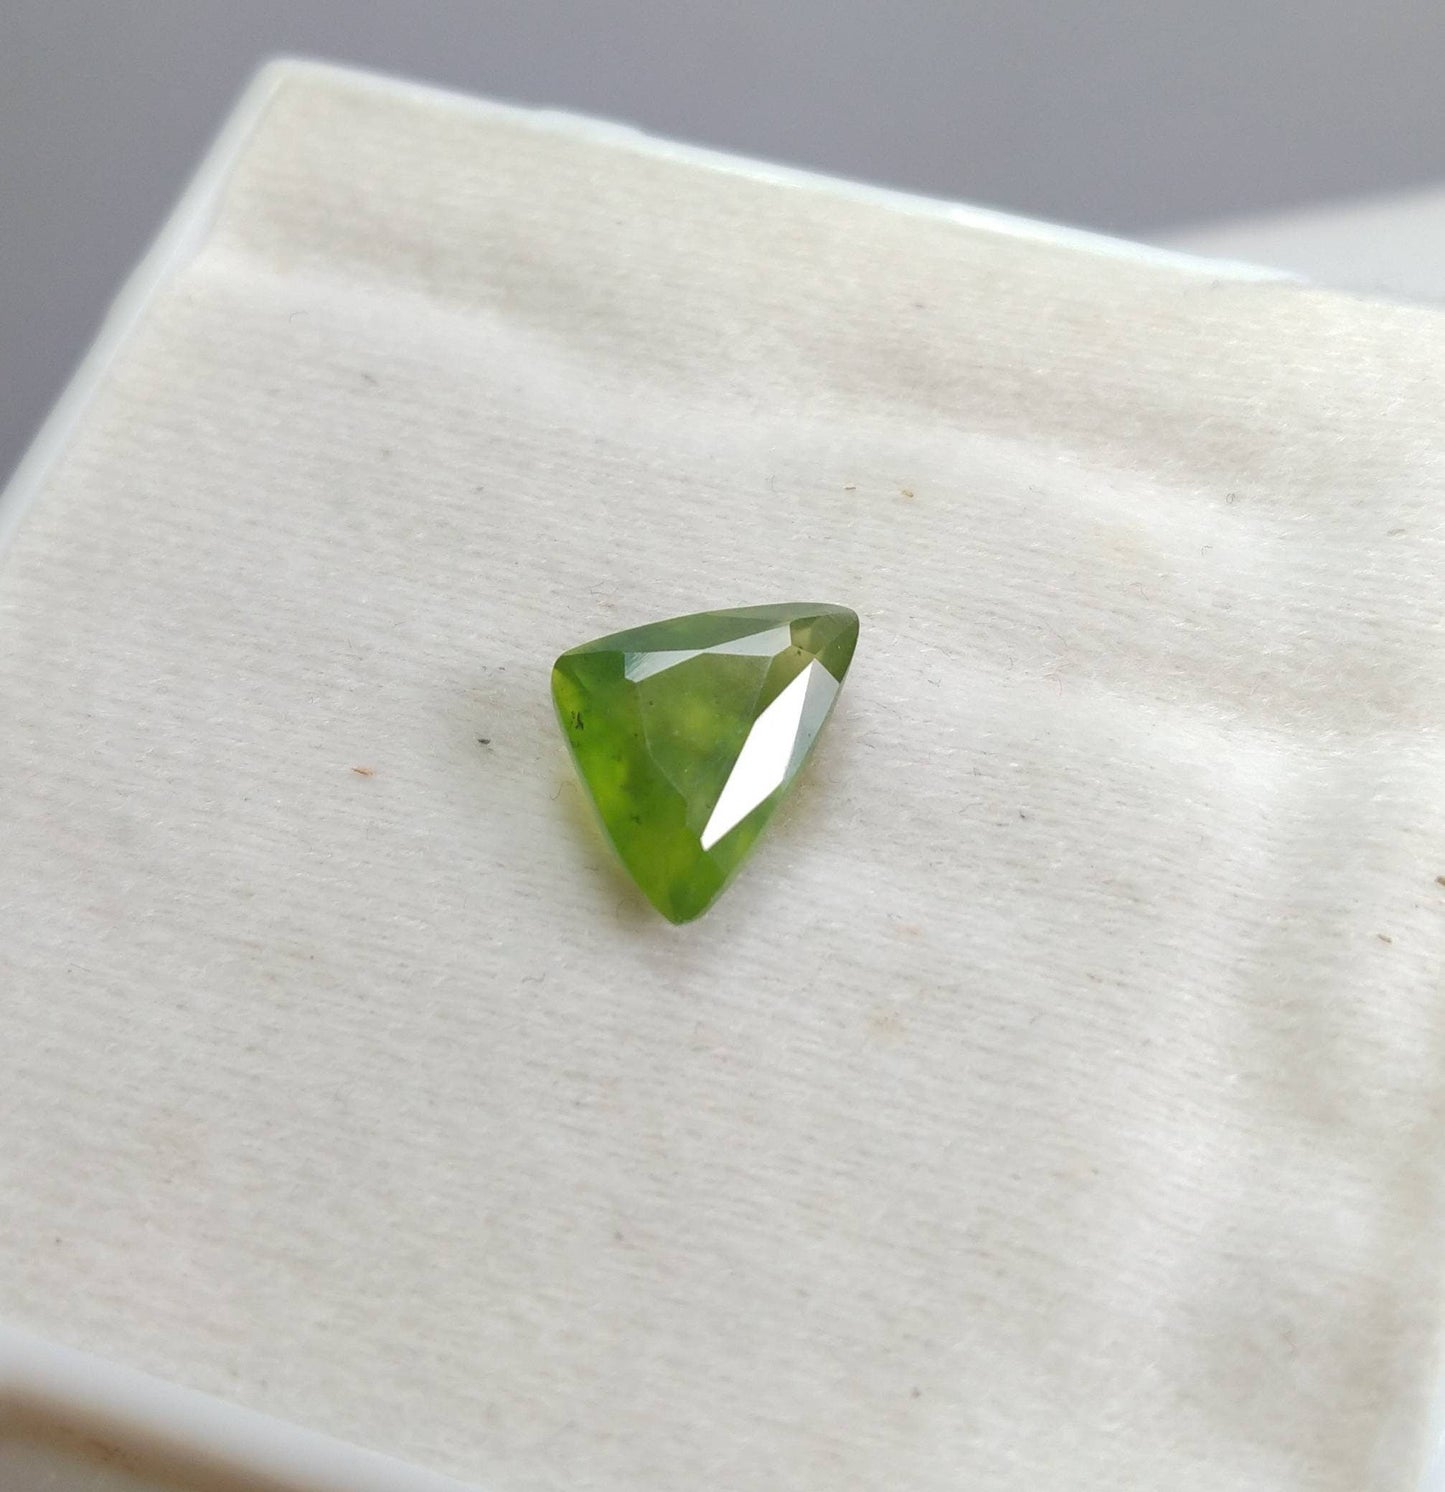 ARSAA GEMS AND MINERALSNatural top quality beautiful 4.5 carats trillion shape faceted hydrograssular garnet gem - Premium  from ARSAA GEMS AND MINERALS - Just $13.00! Shop now at ARSAA GEMS AND MINERALS